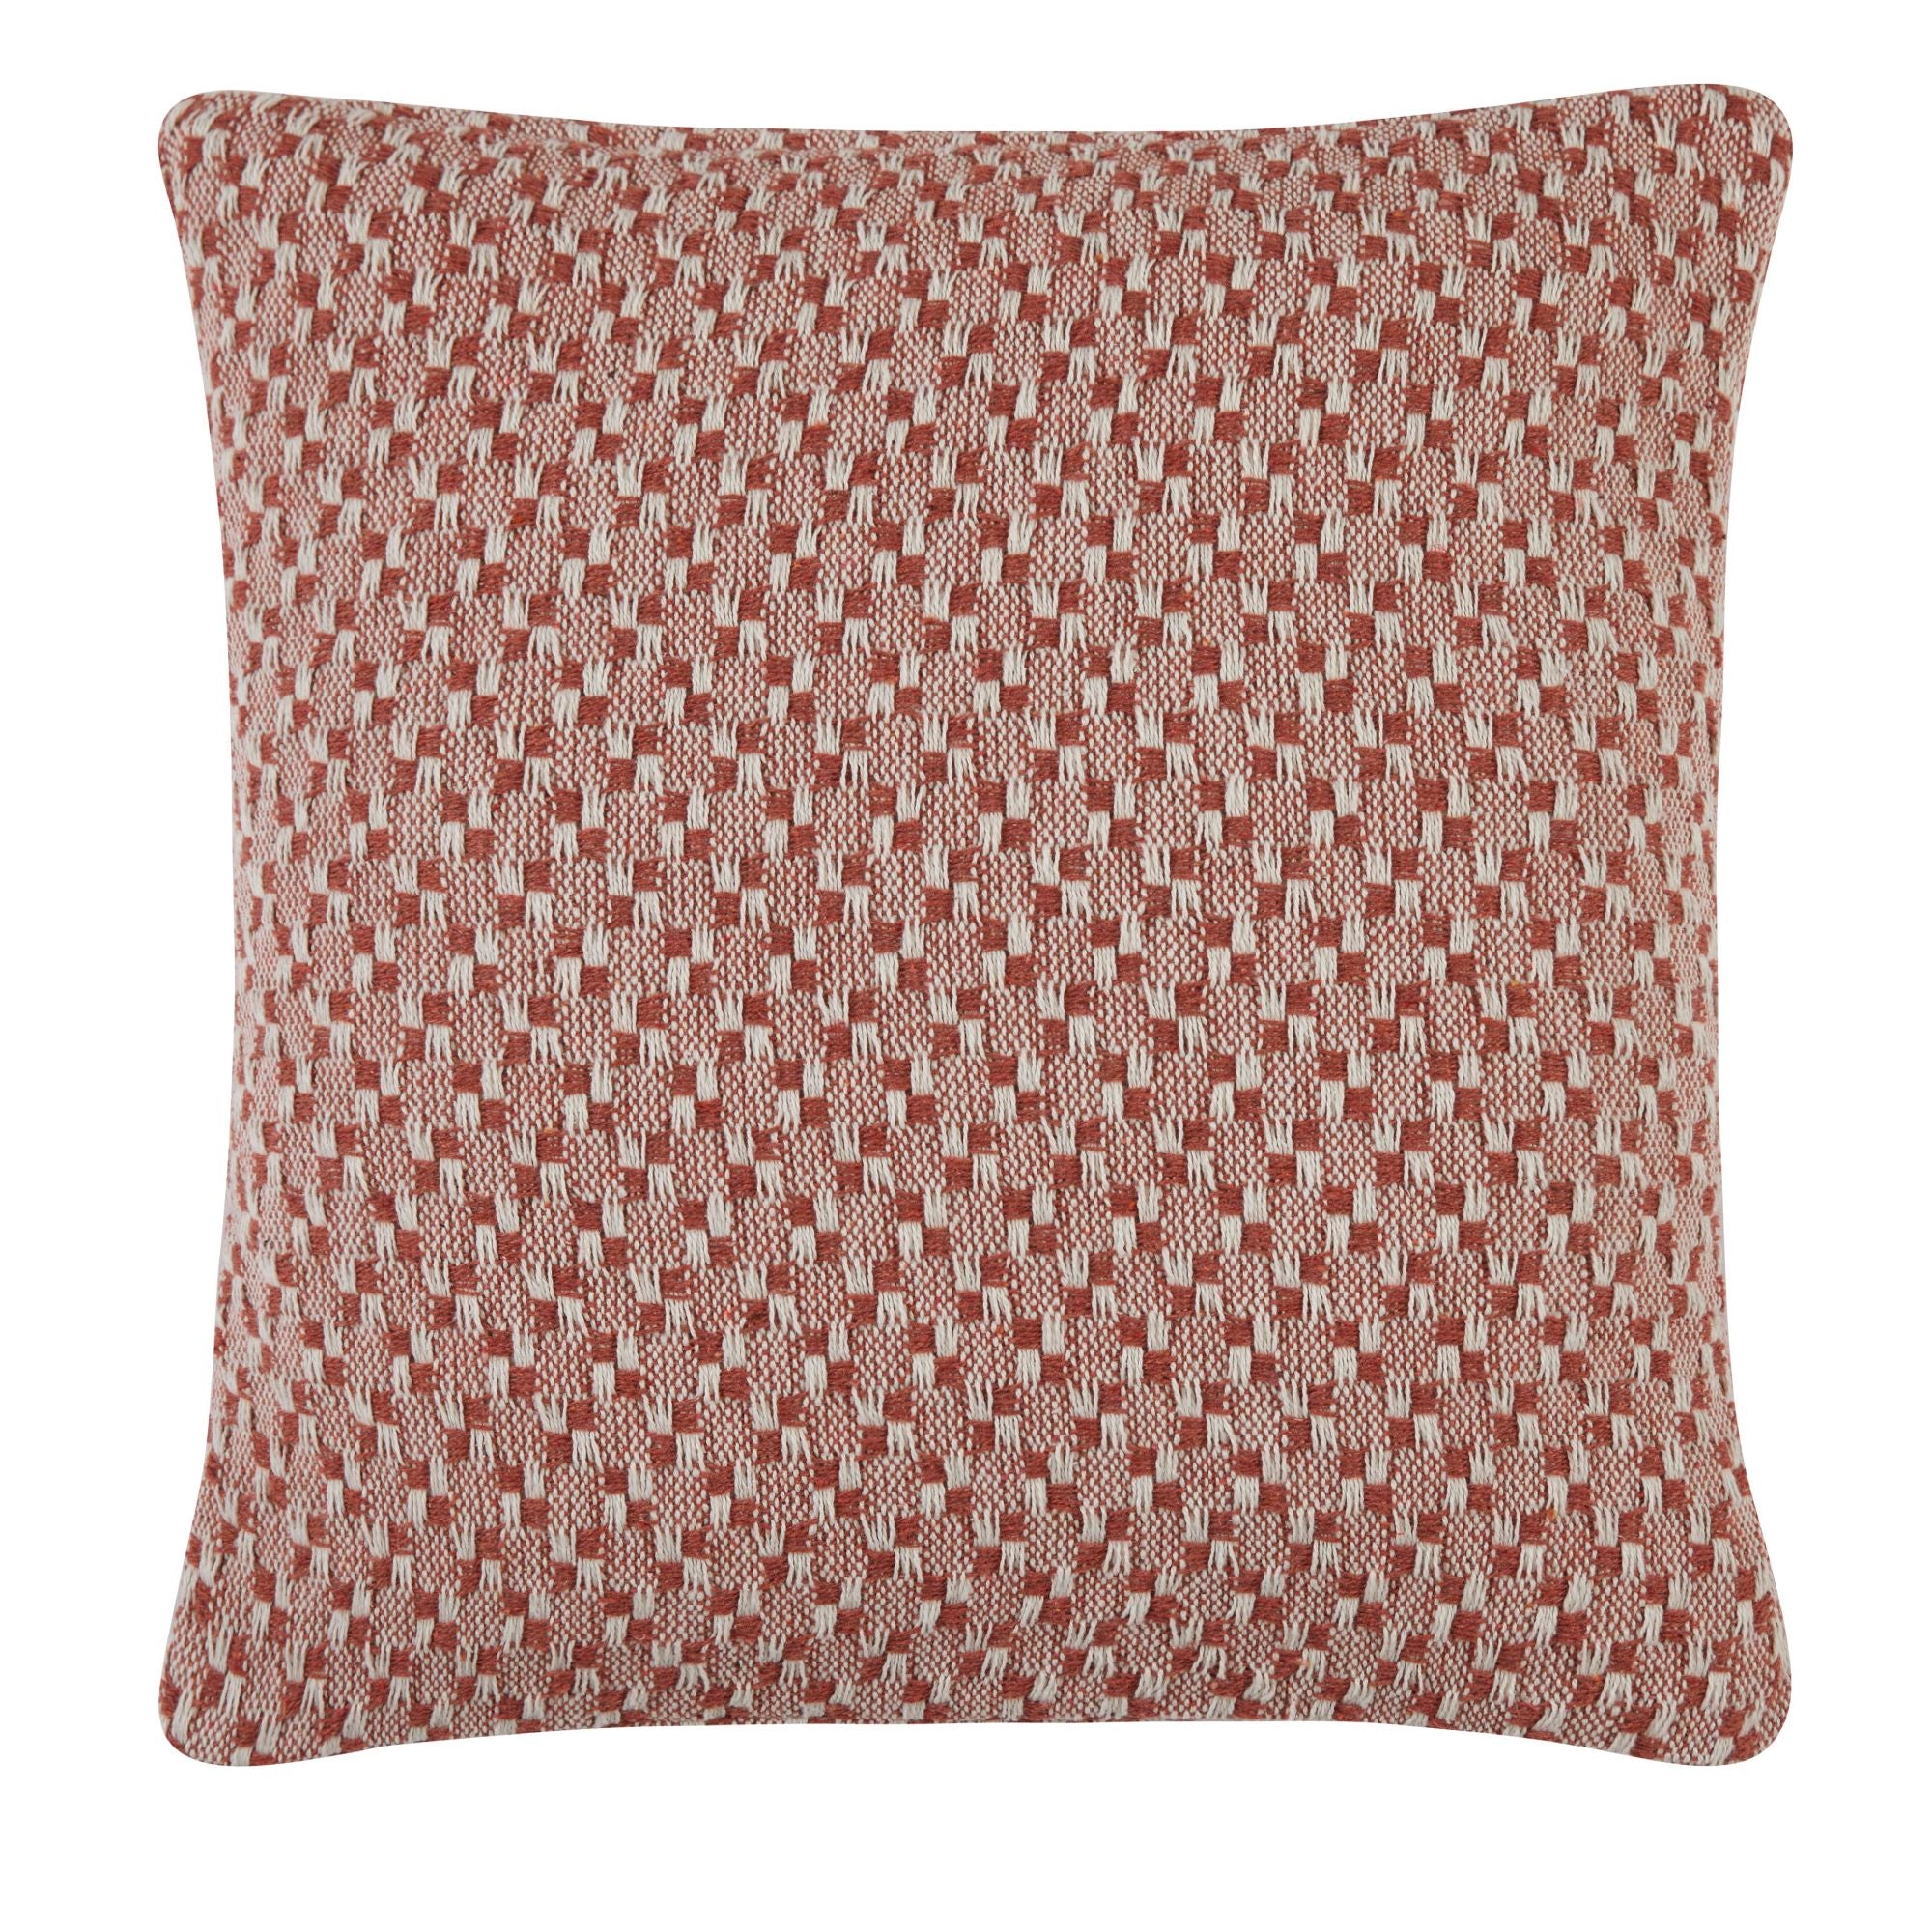 Appletree Bexley Recycled Cushion Cover - Paprika